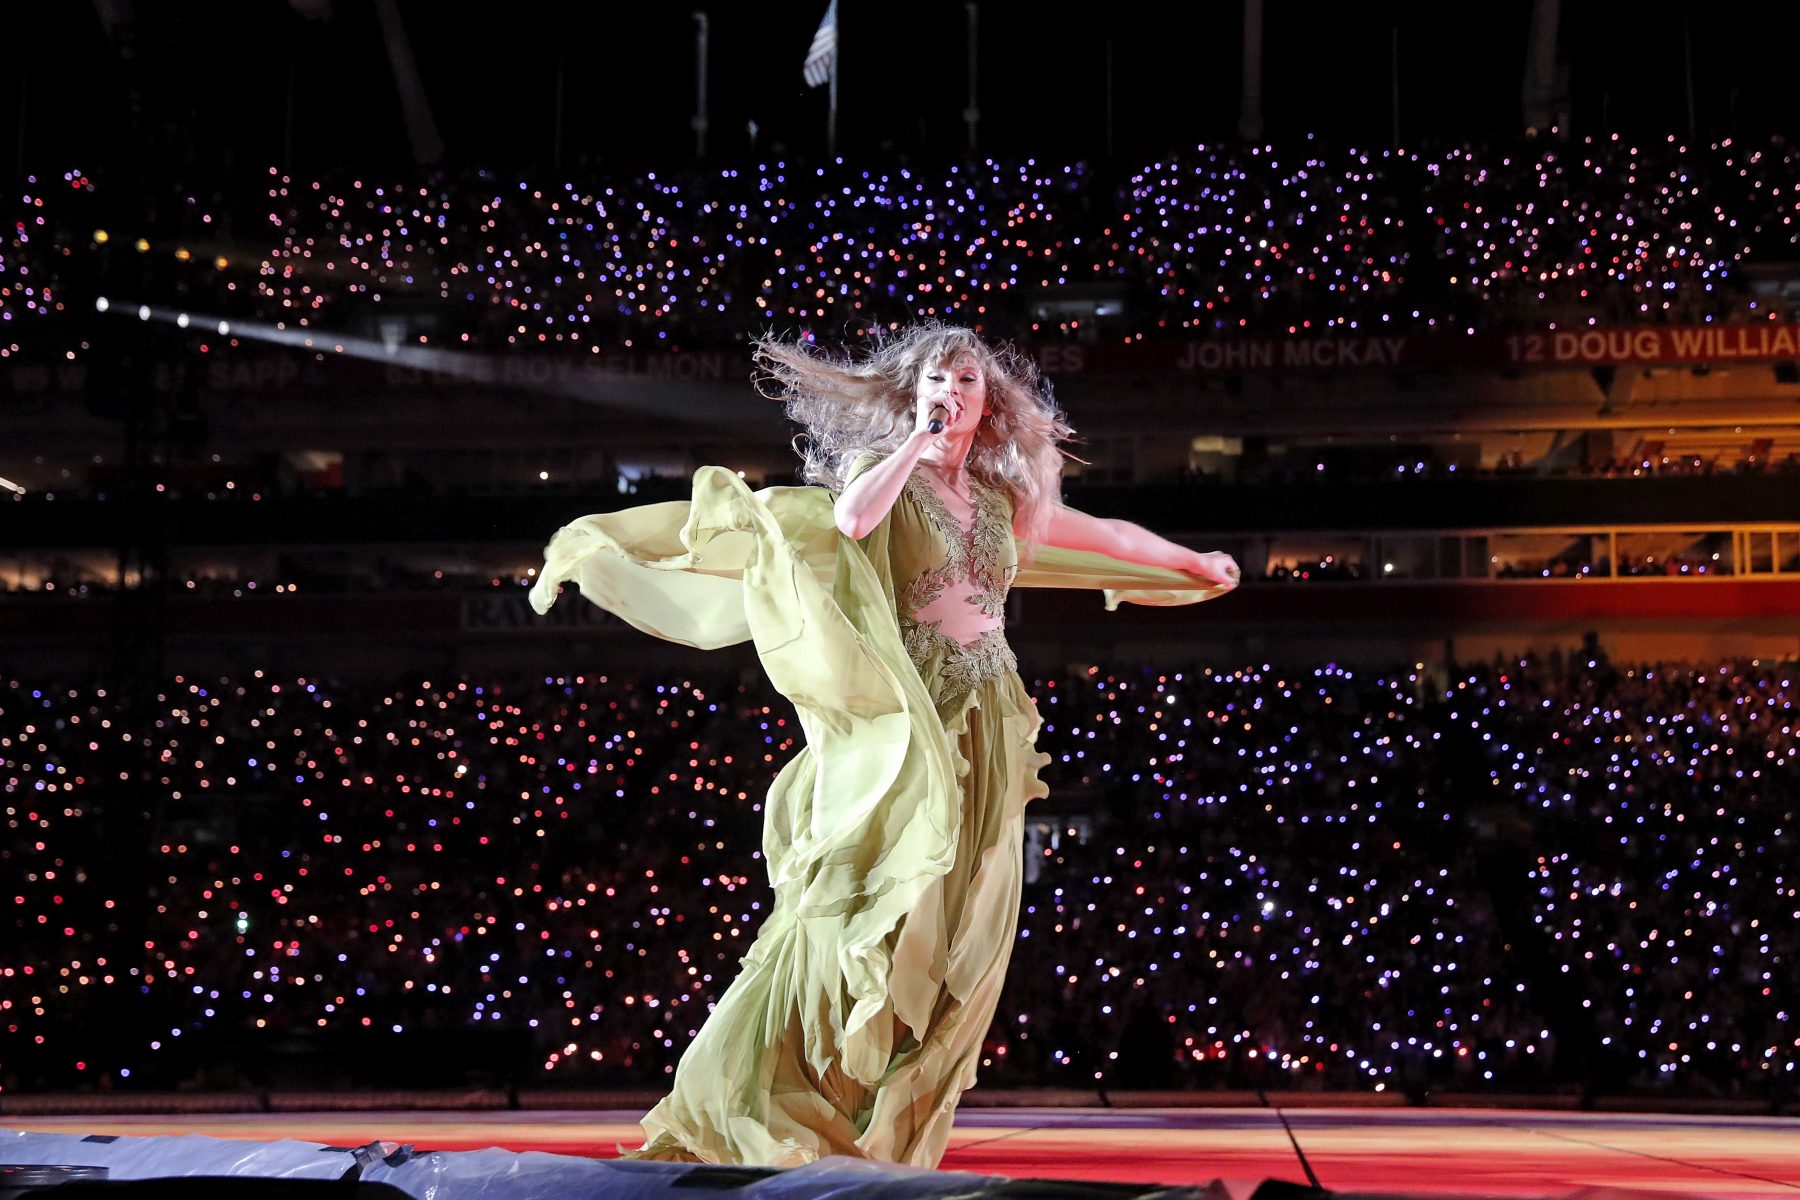 taylor swift on stage in tampa, florida